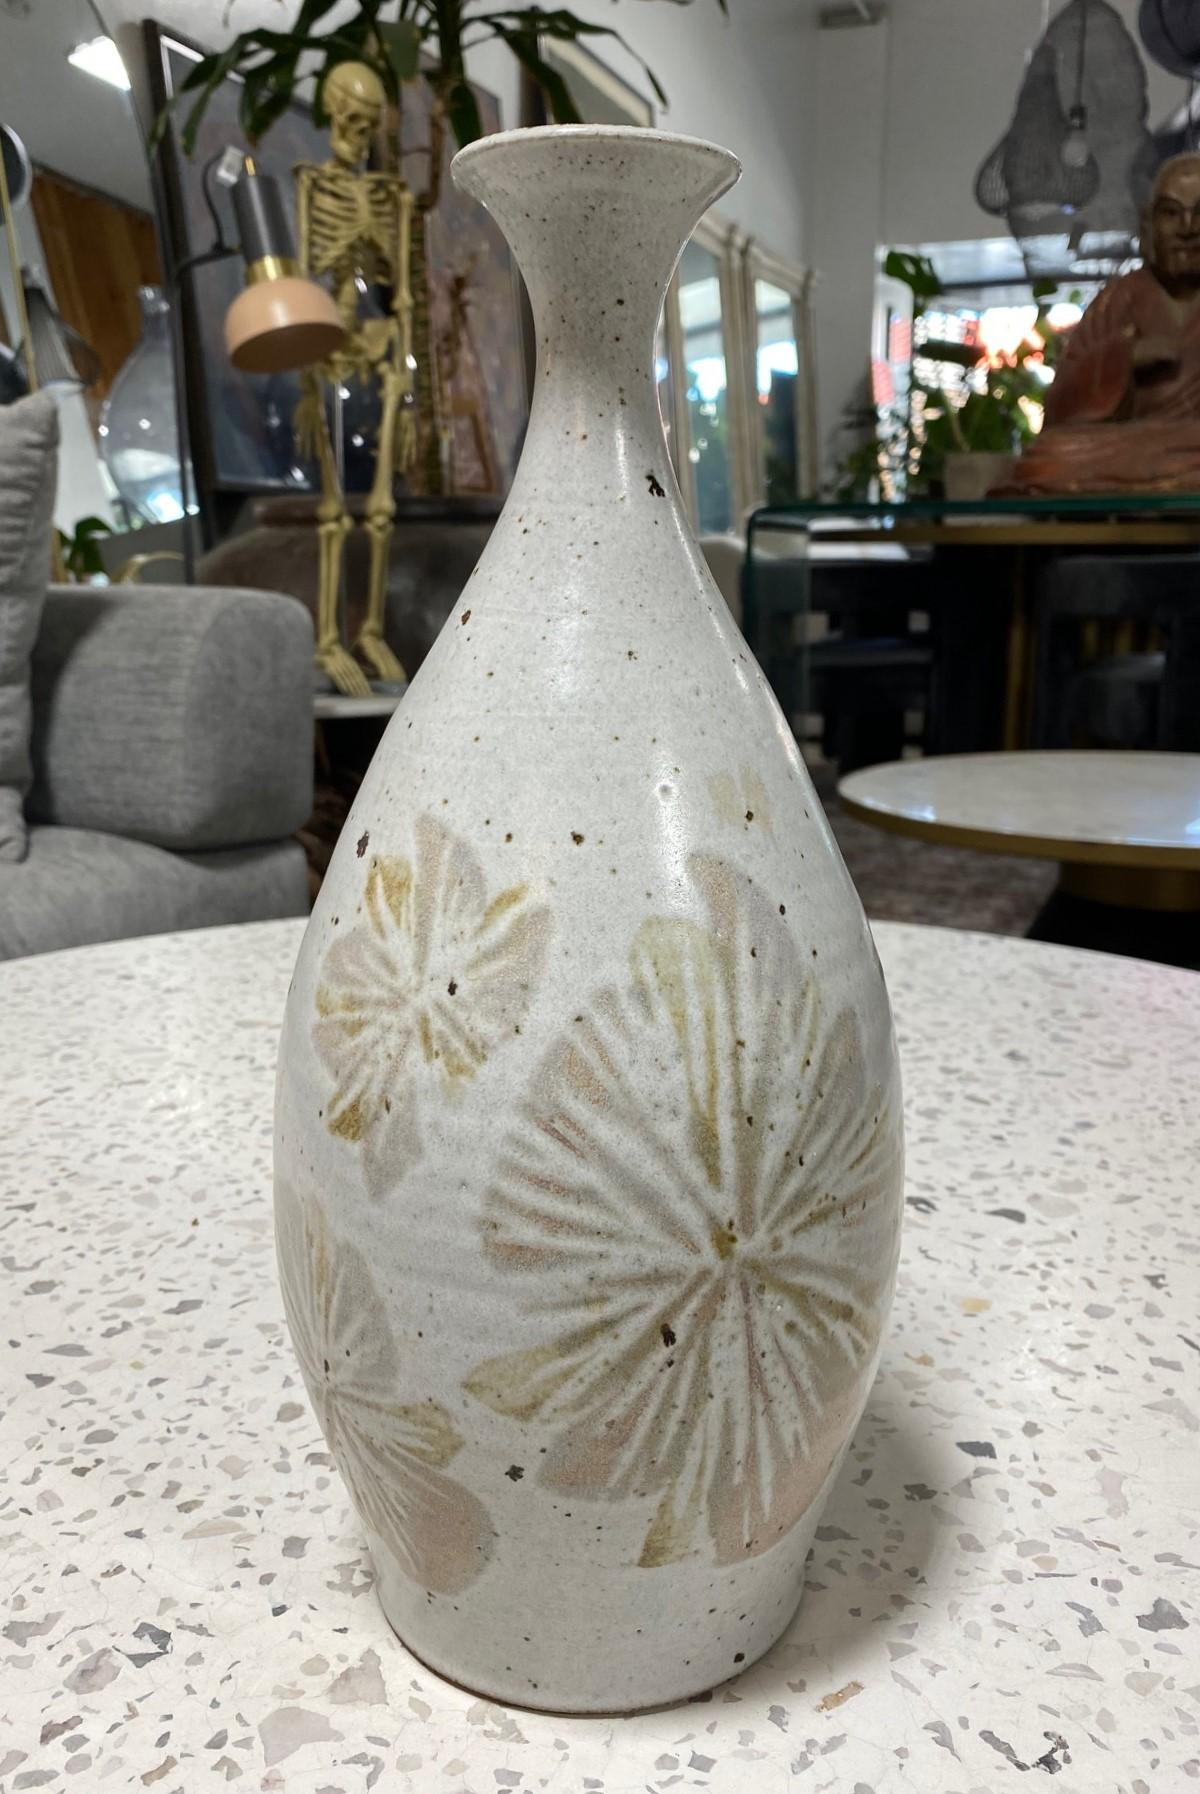 A beautifully crafted, wonderfully designed, large Mid-century Modern California Studio pottery vase by famed California ceramic artist Robert Maxwell featuring a radiant pale grayish glaze and hand-painted flower/floral motif.  

Maxwell, who